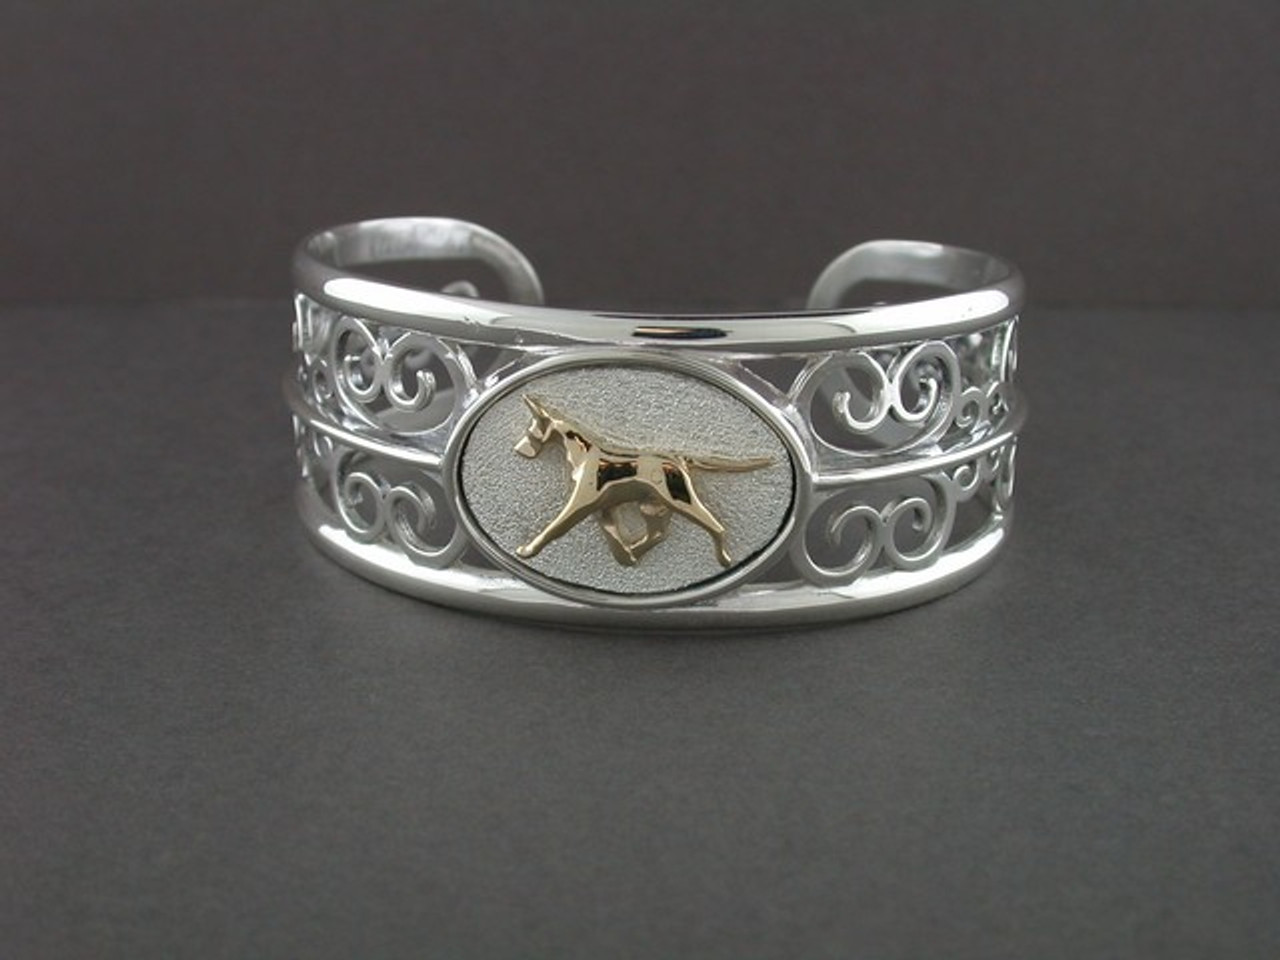 Bracelet Cuff Wide With Scrolls And Great Dane